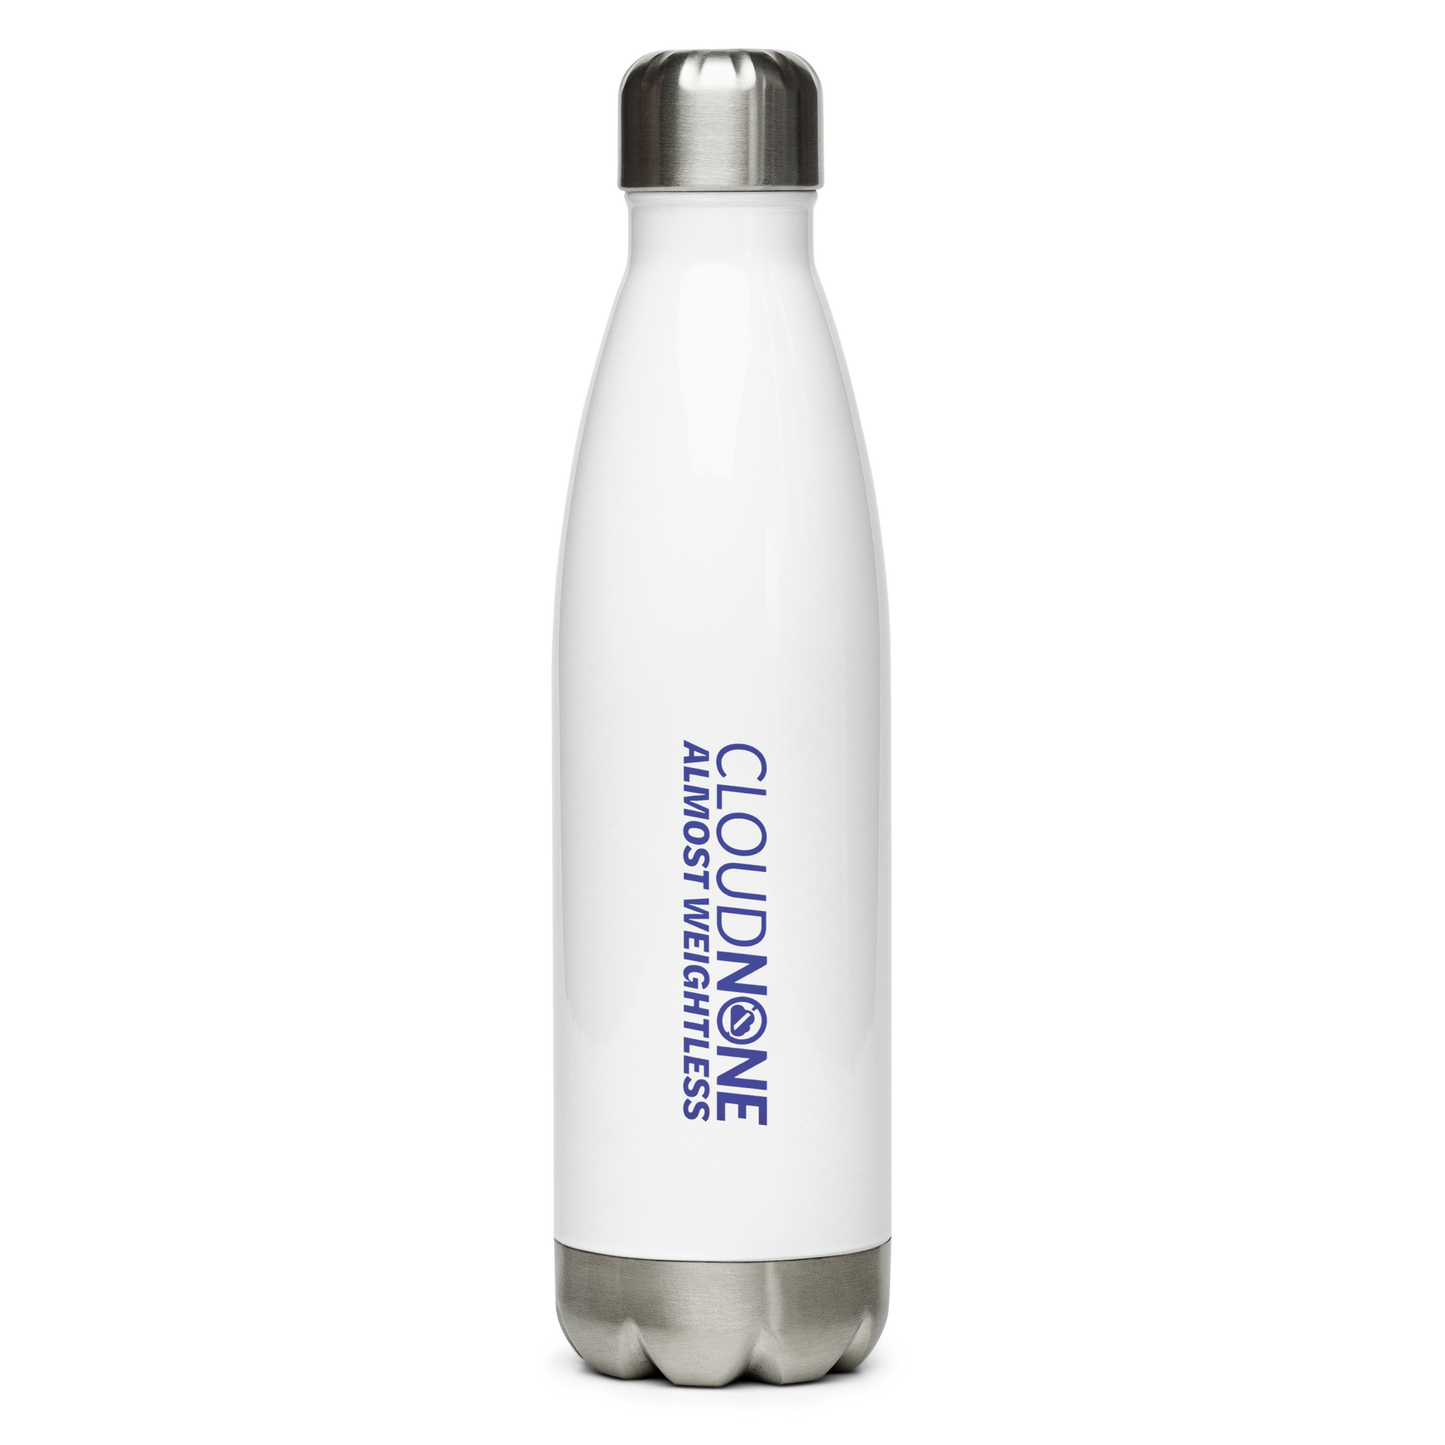 Almost Weightless Stainless Steel Water Bottle